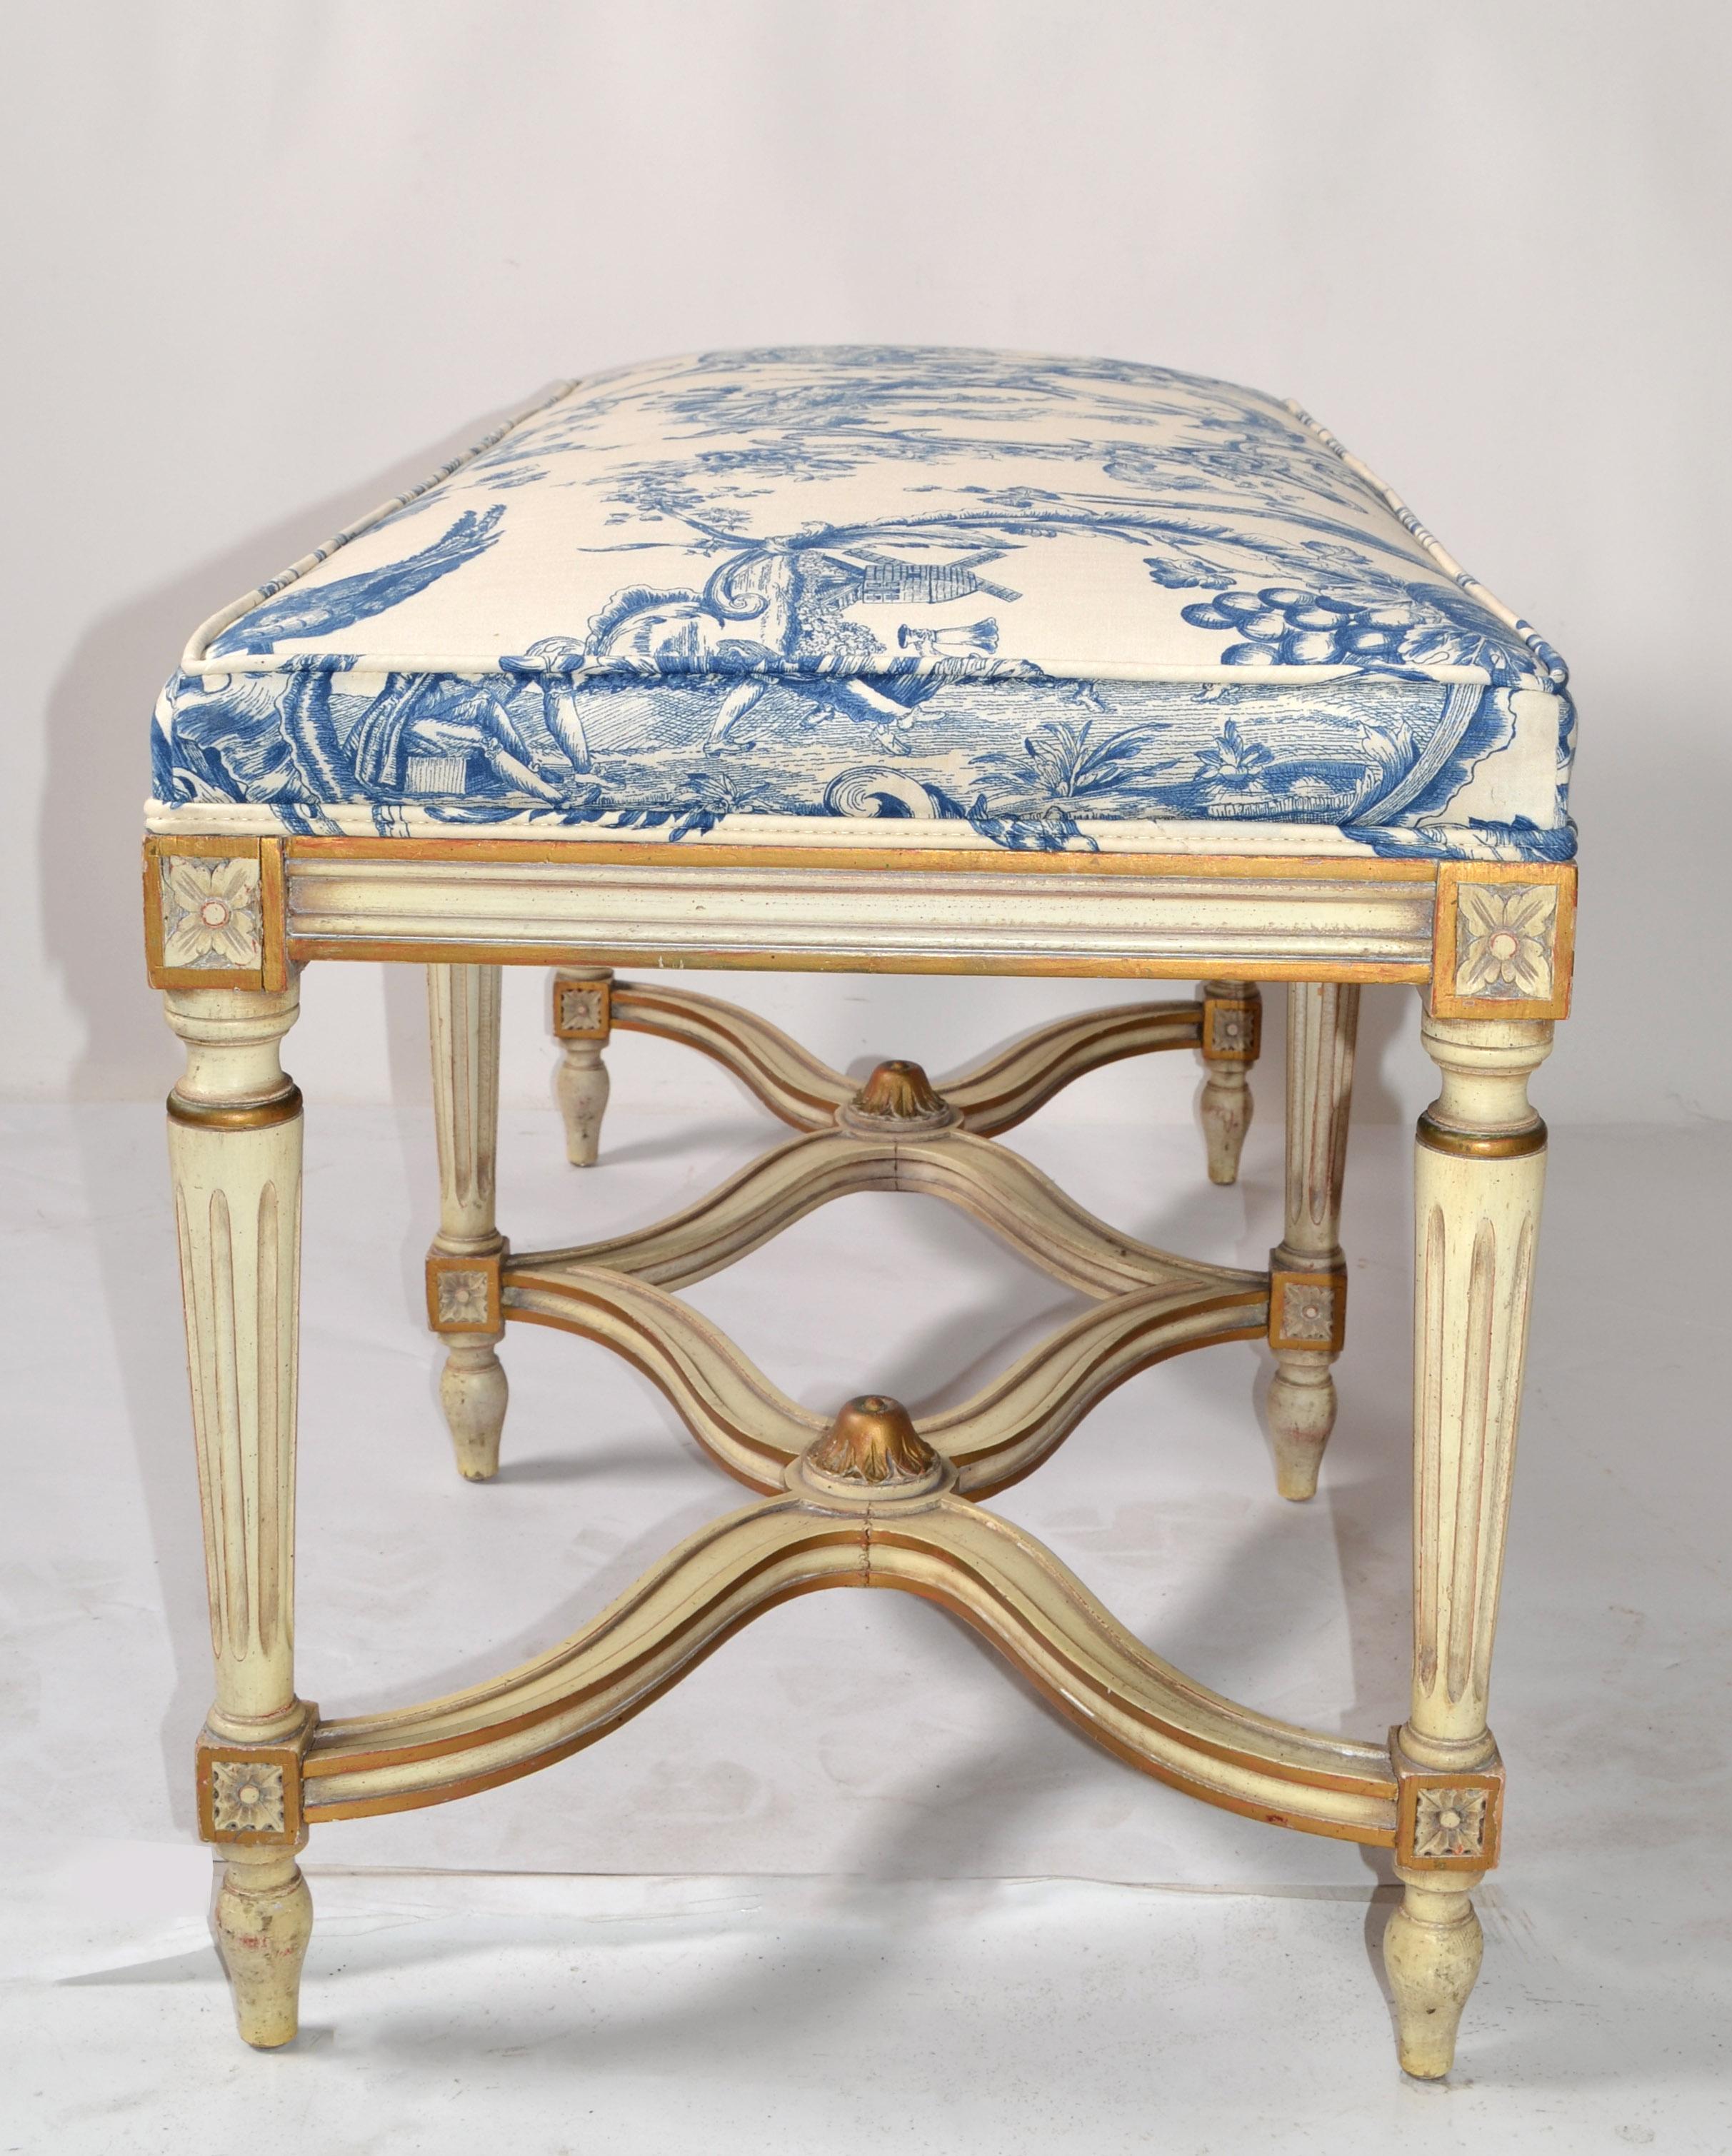 Hand-Carved Louis XVI Bench Karges Furniture Co. Hand Carved Hardwood Blue Motif Fabric For Sale